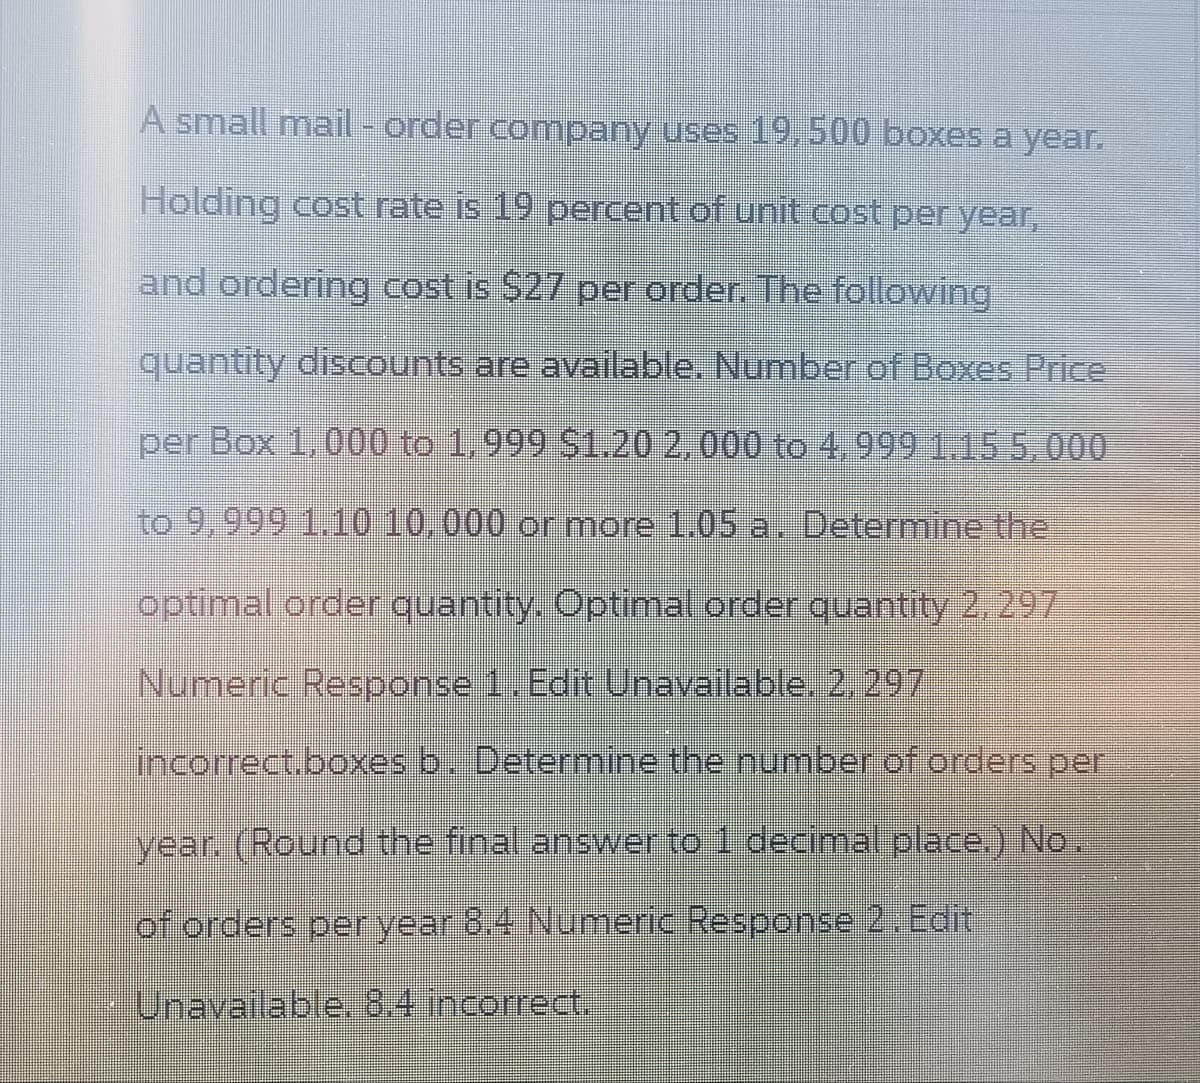 A small mail-order company uses 19,500 boxes a year.
Holding cost rate is 19 percent of unit cost per year,
and ordering cost is $27 per order. The following
quantity discounts are available. Number of Boxes Price
per Box 1,000 to 1,999 $1.20 2,000 to 4.999 1.15 5,000
to 9,999 1.10 10,000 or more 1.05 a. Determine the
optimal order quantity. Optimal order quantity 2, 297
Numeric Response 1. Edit Unavailable. 2,297
incorrect.boxes b. Determine the number of orders per
year. (Round the final answer to 1 decimal place.) No.
of orders per year 8.4 Numeric Response 2. Edit
Unavailable. 8.4 incorrect.